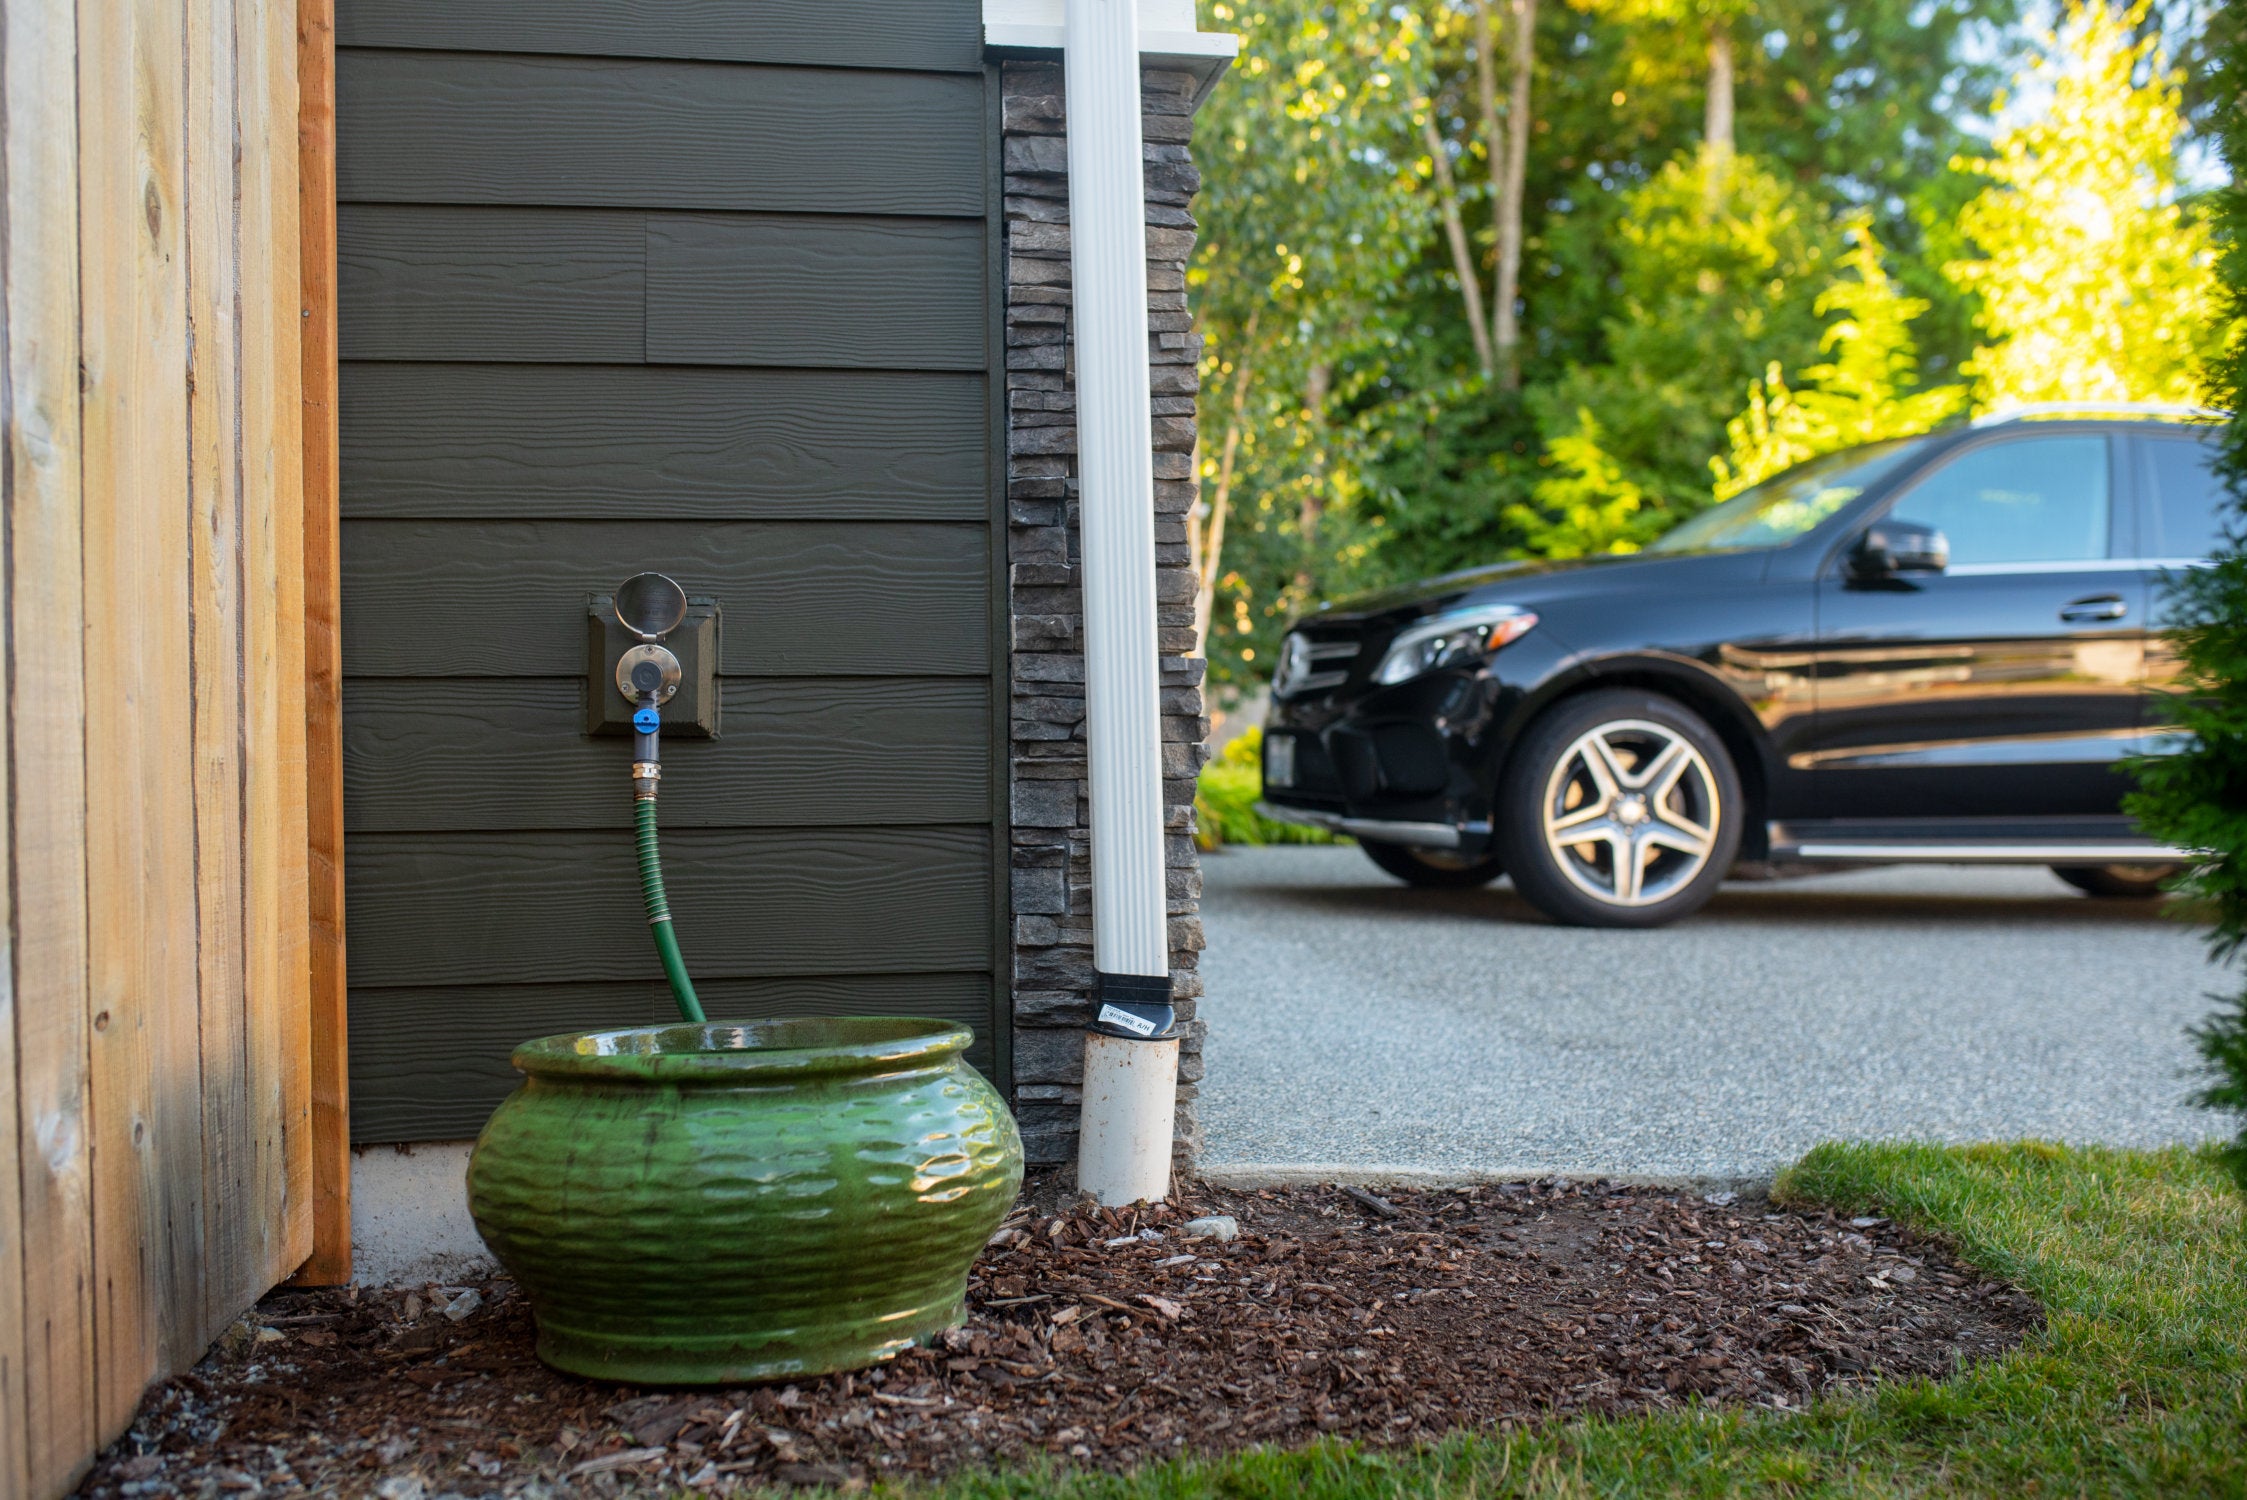 The Top 5 Best Ways to Wash Your Car: A Guide to Keeping Your Car